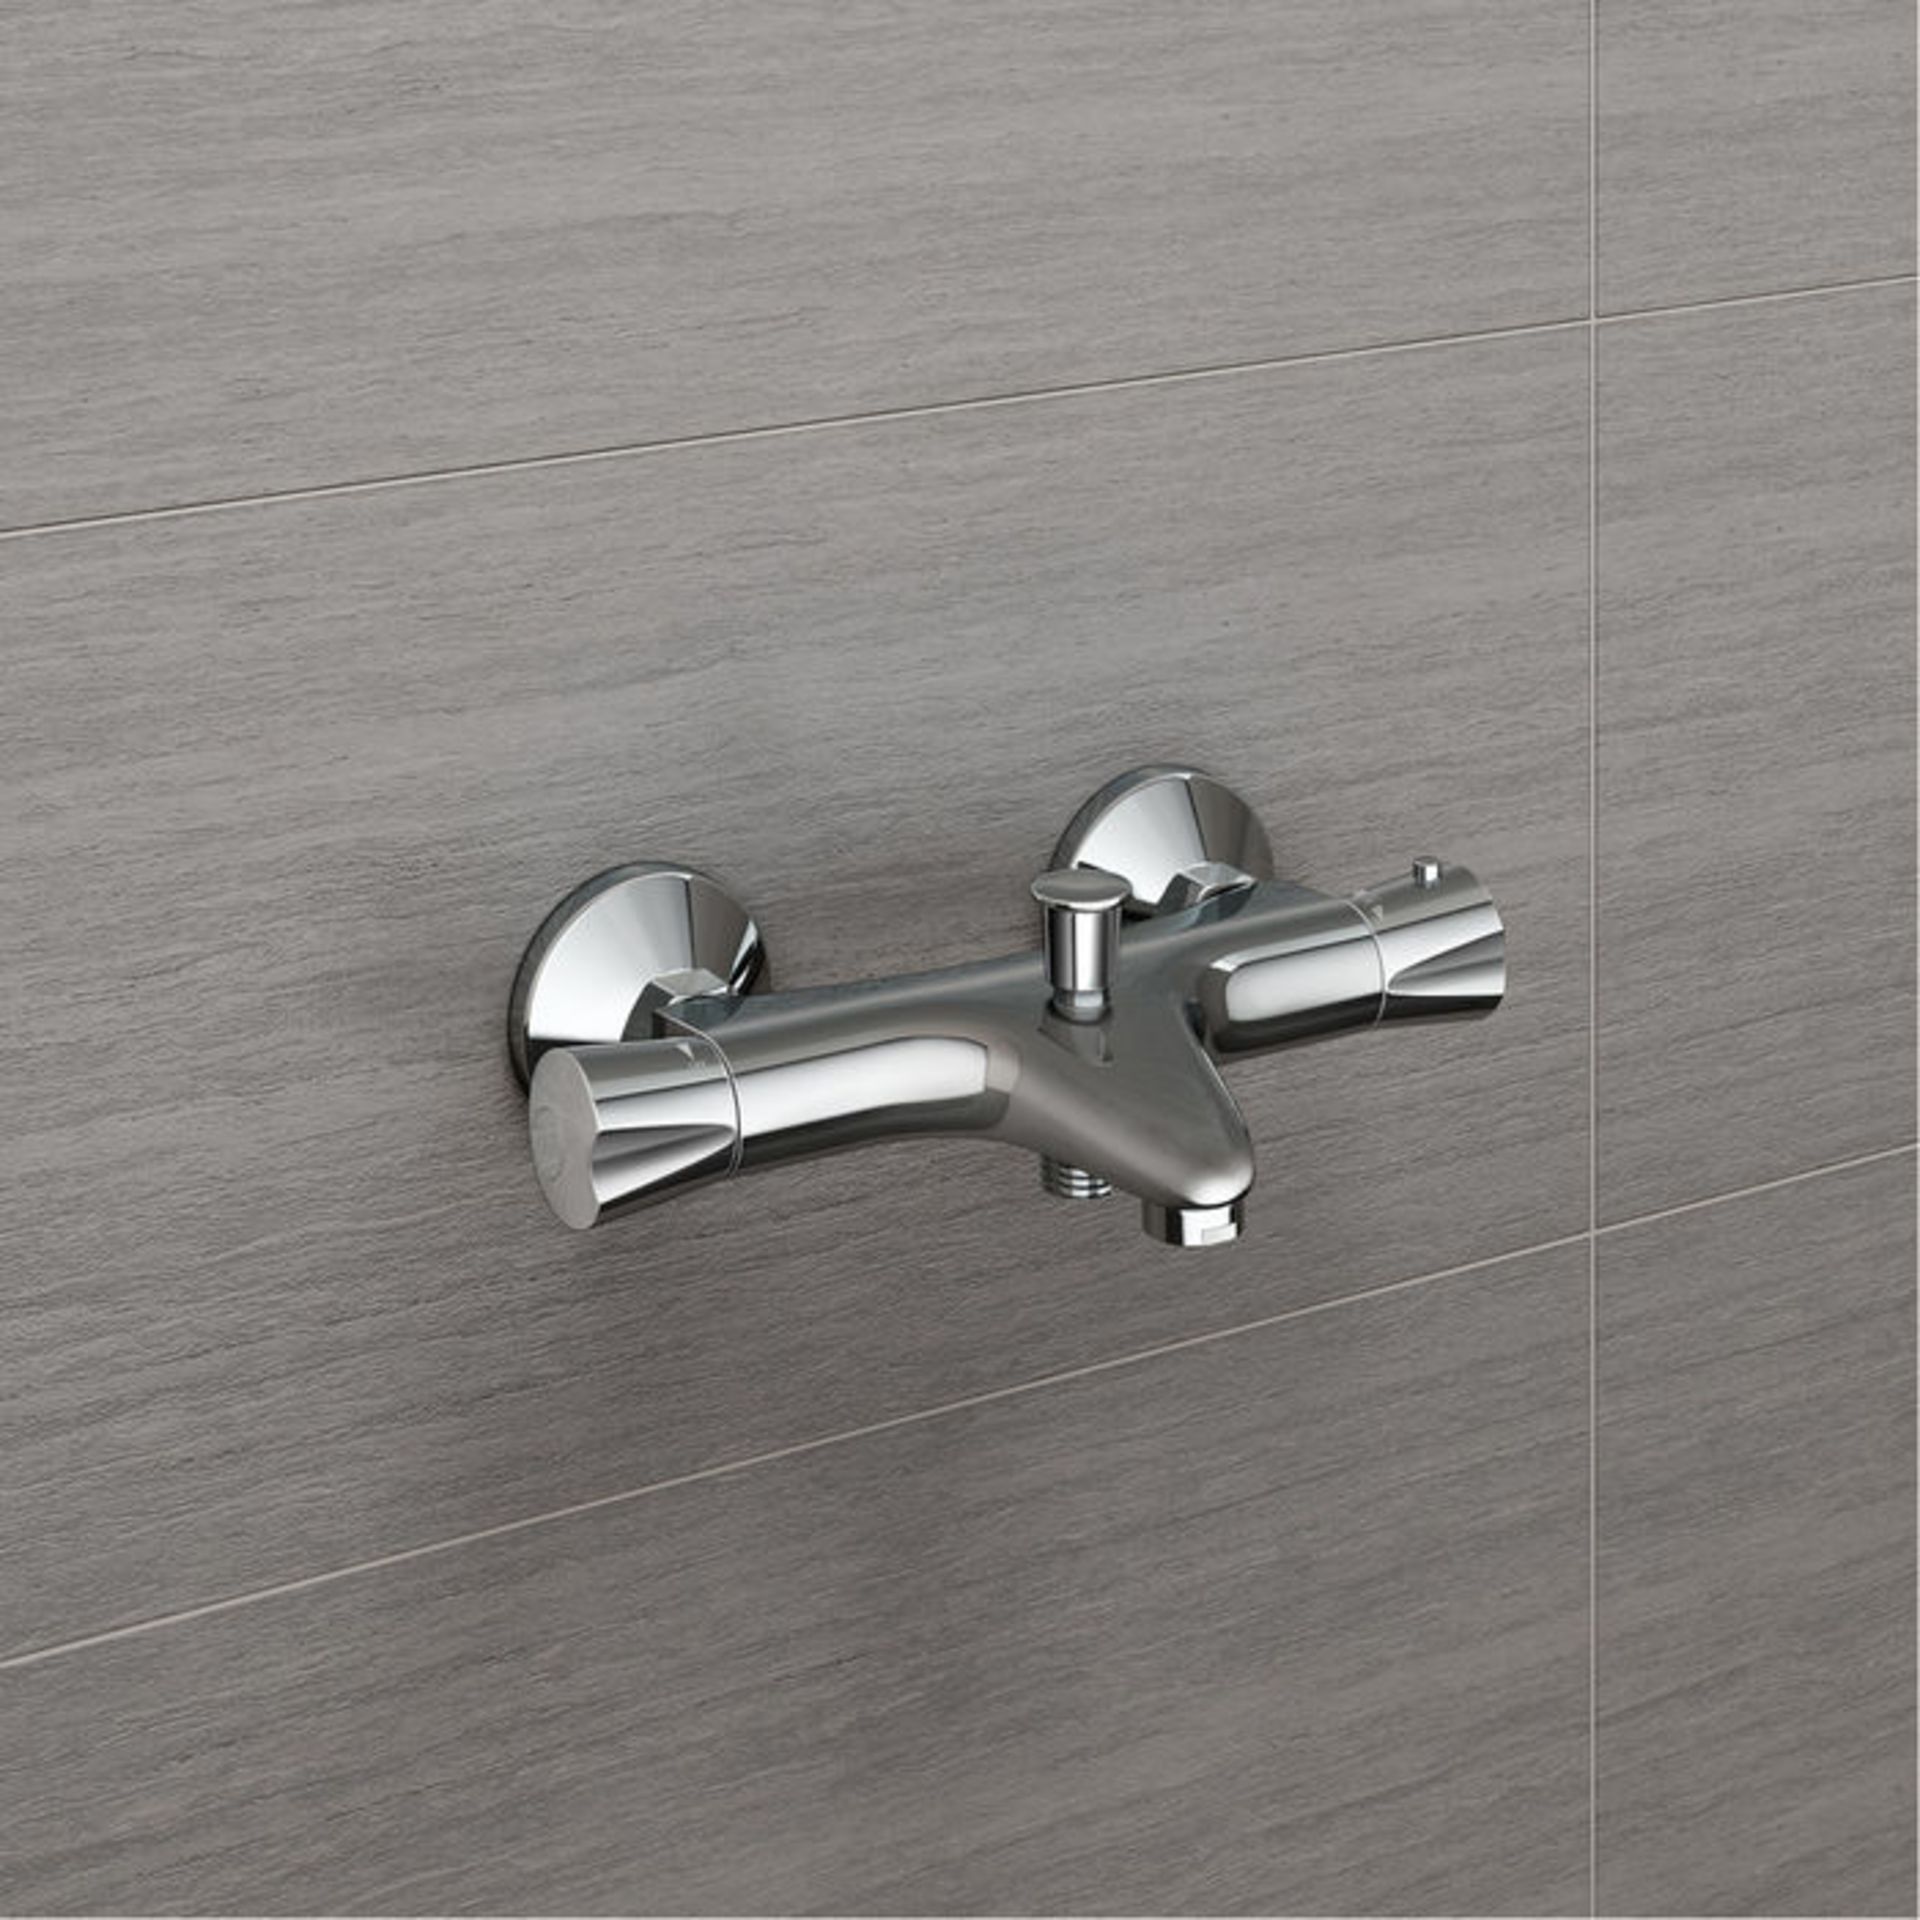 (S184) Shower Mixer Valve with Bath Filler. RRP £199.99. Chrome Plated Solid Brass Mixer - Image 3 of 3